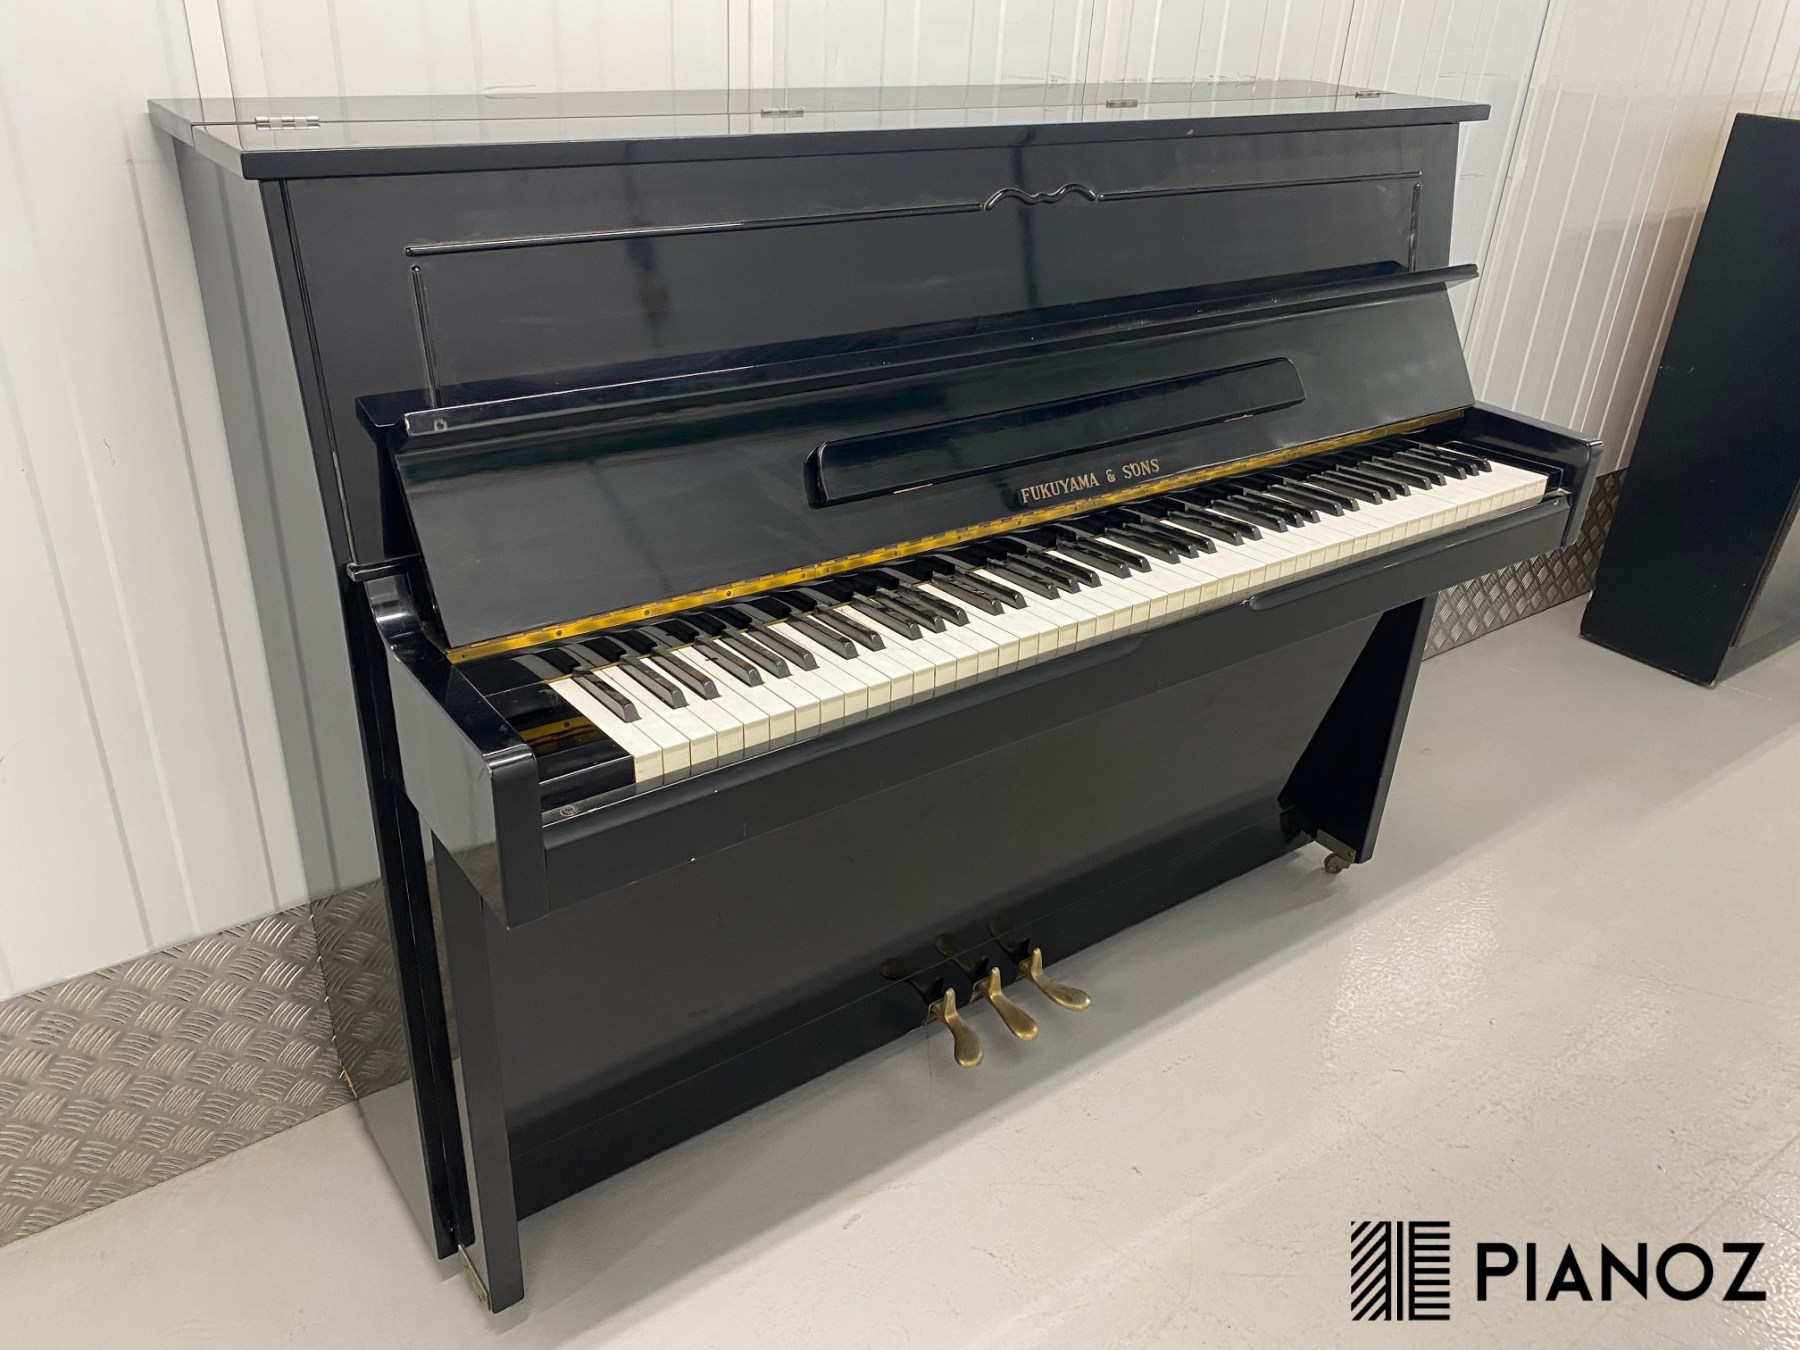 Fukuyama & Sons Black Gloss Upright Piano piano for sale in UK